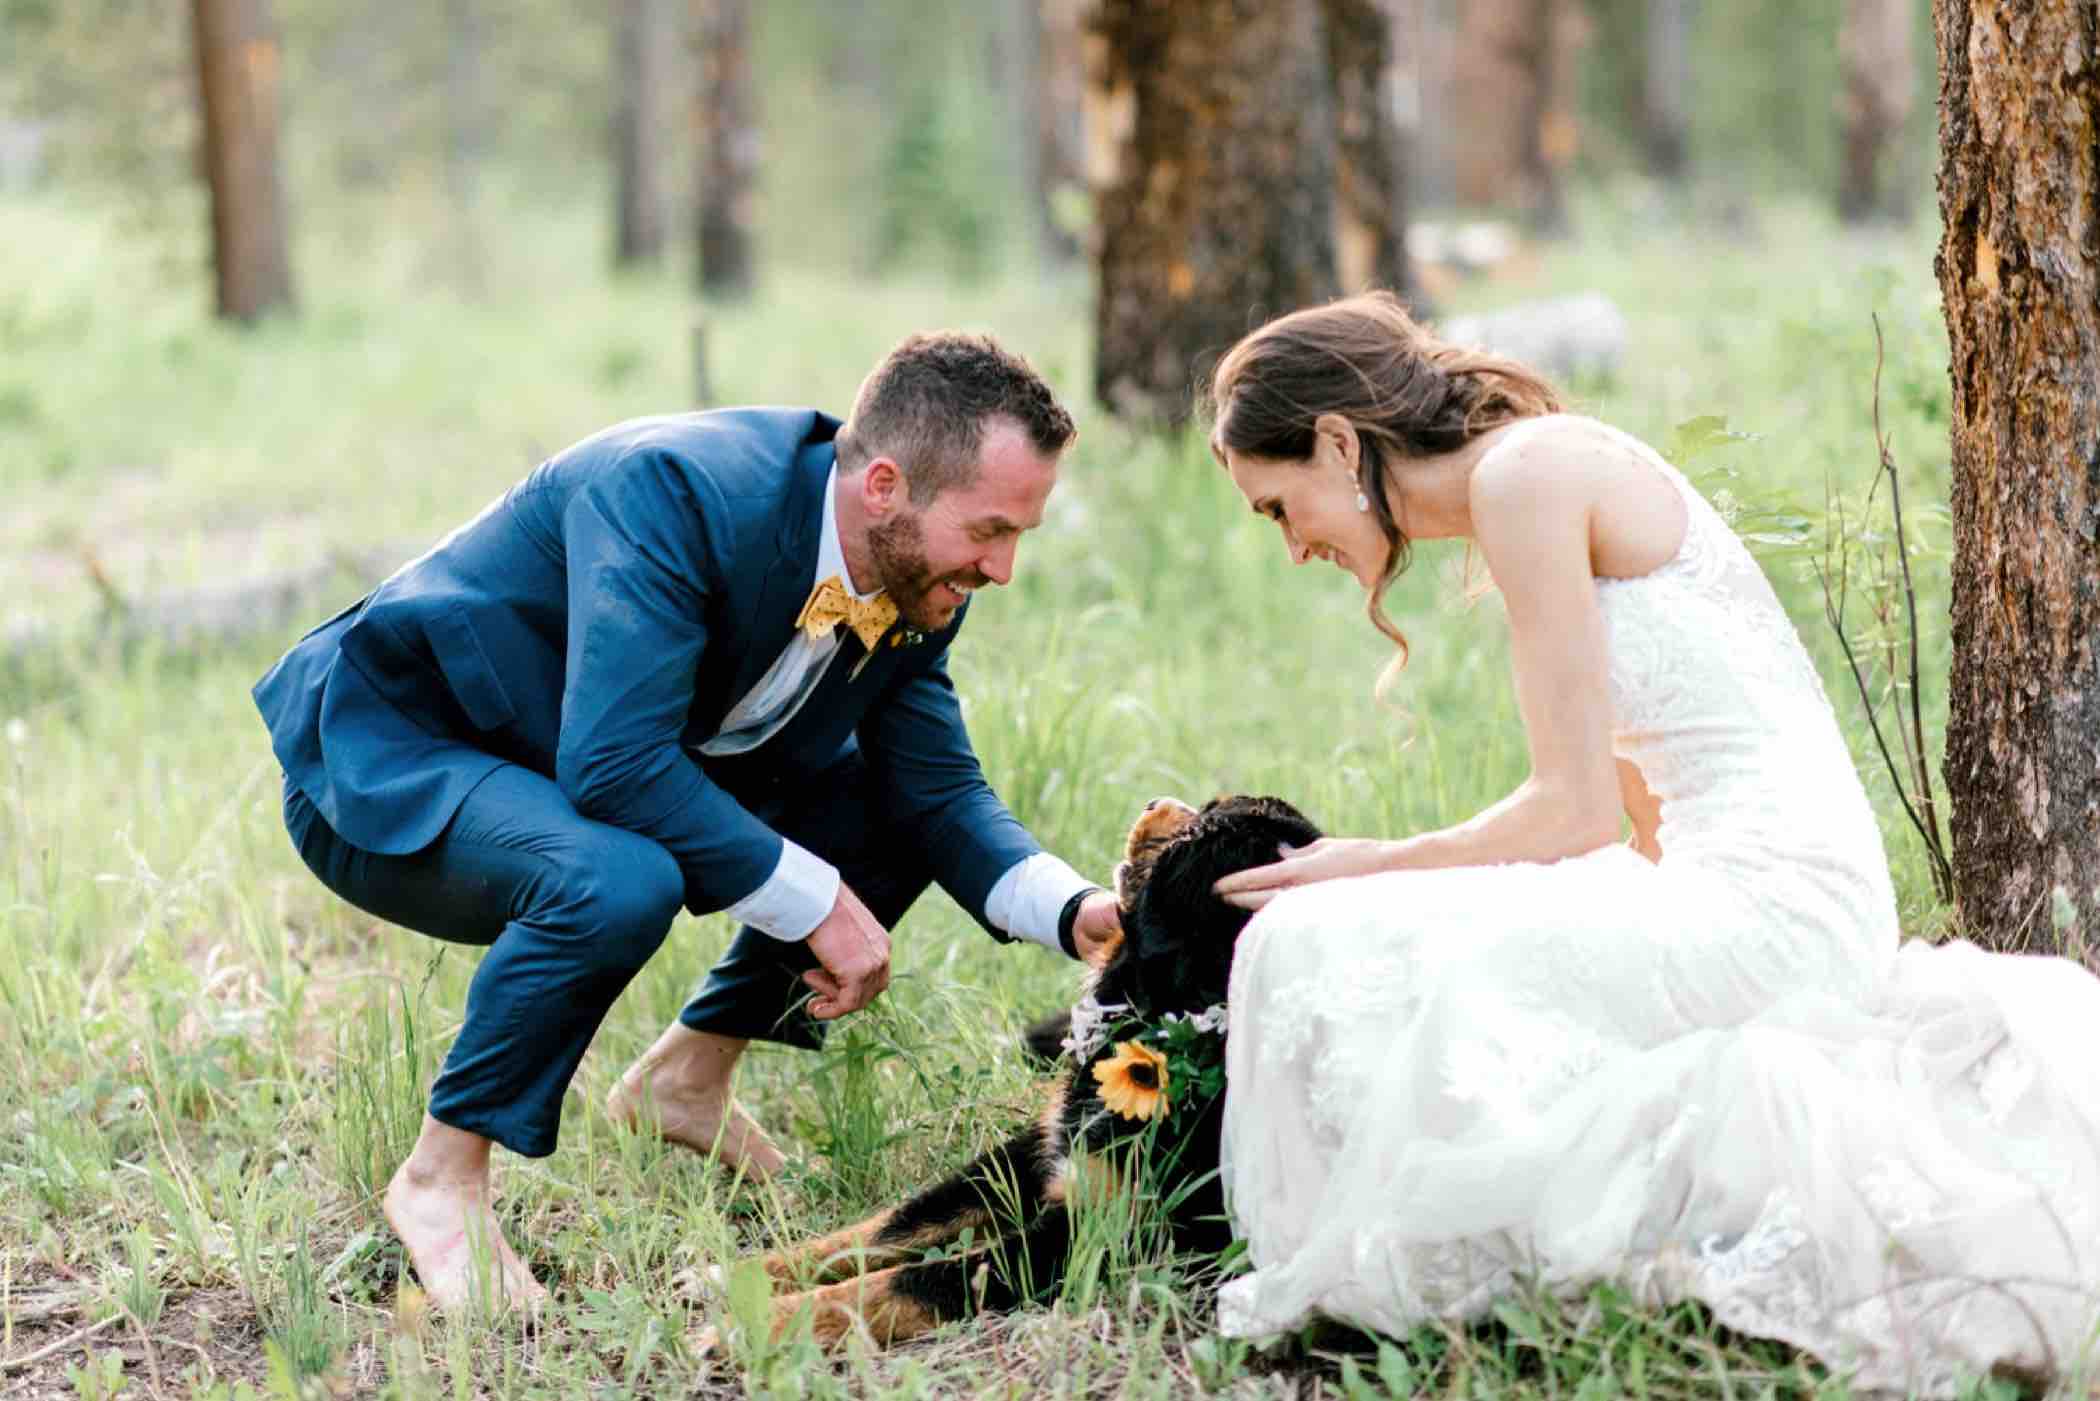 Kris and Sallie say hi to their flower dog, their Bernese Mountain Dog Lucie after their wedding ceremony at the Piney River Ranch in Vail, Colorado. Photo by Ali and Garrett, Romantic, Adventurous, Nostalgic Wedding Photographers.